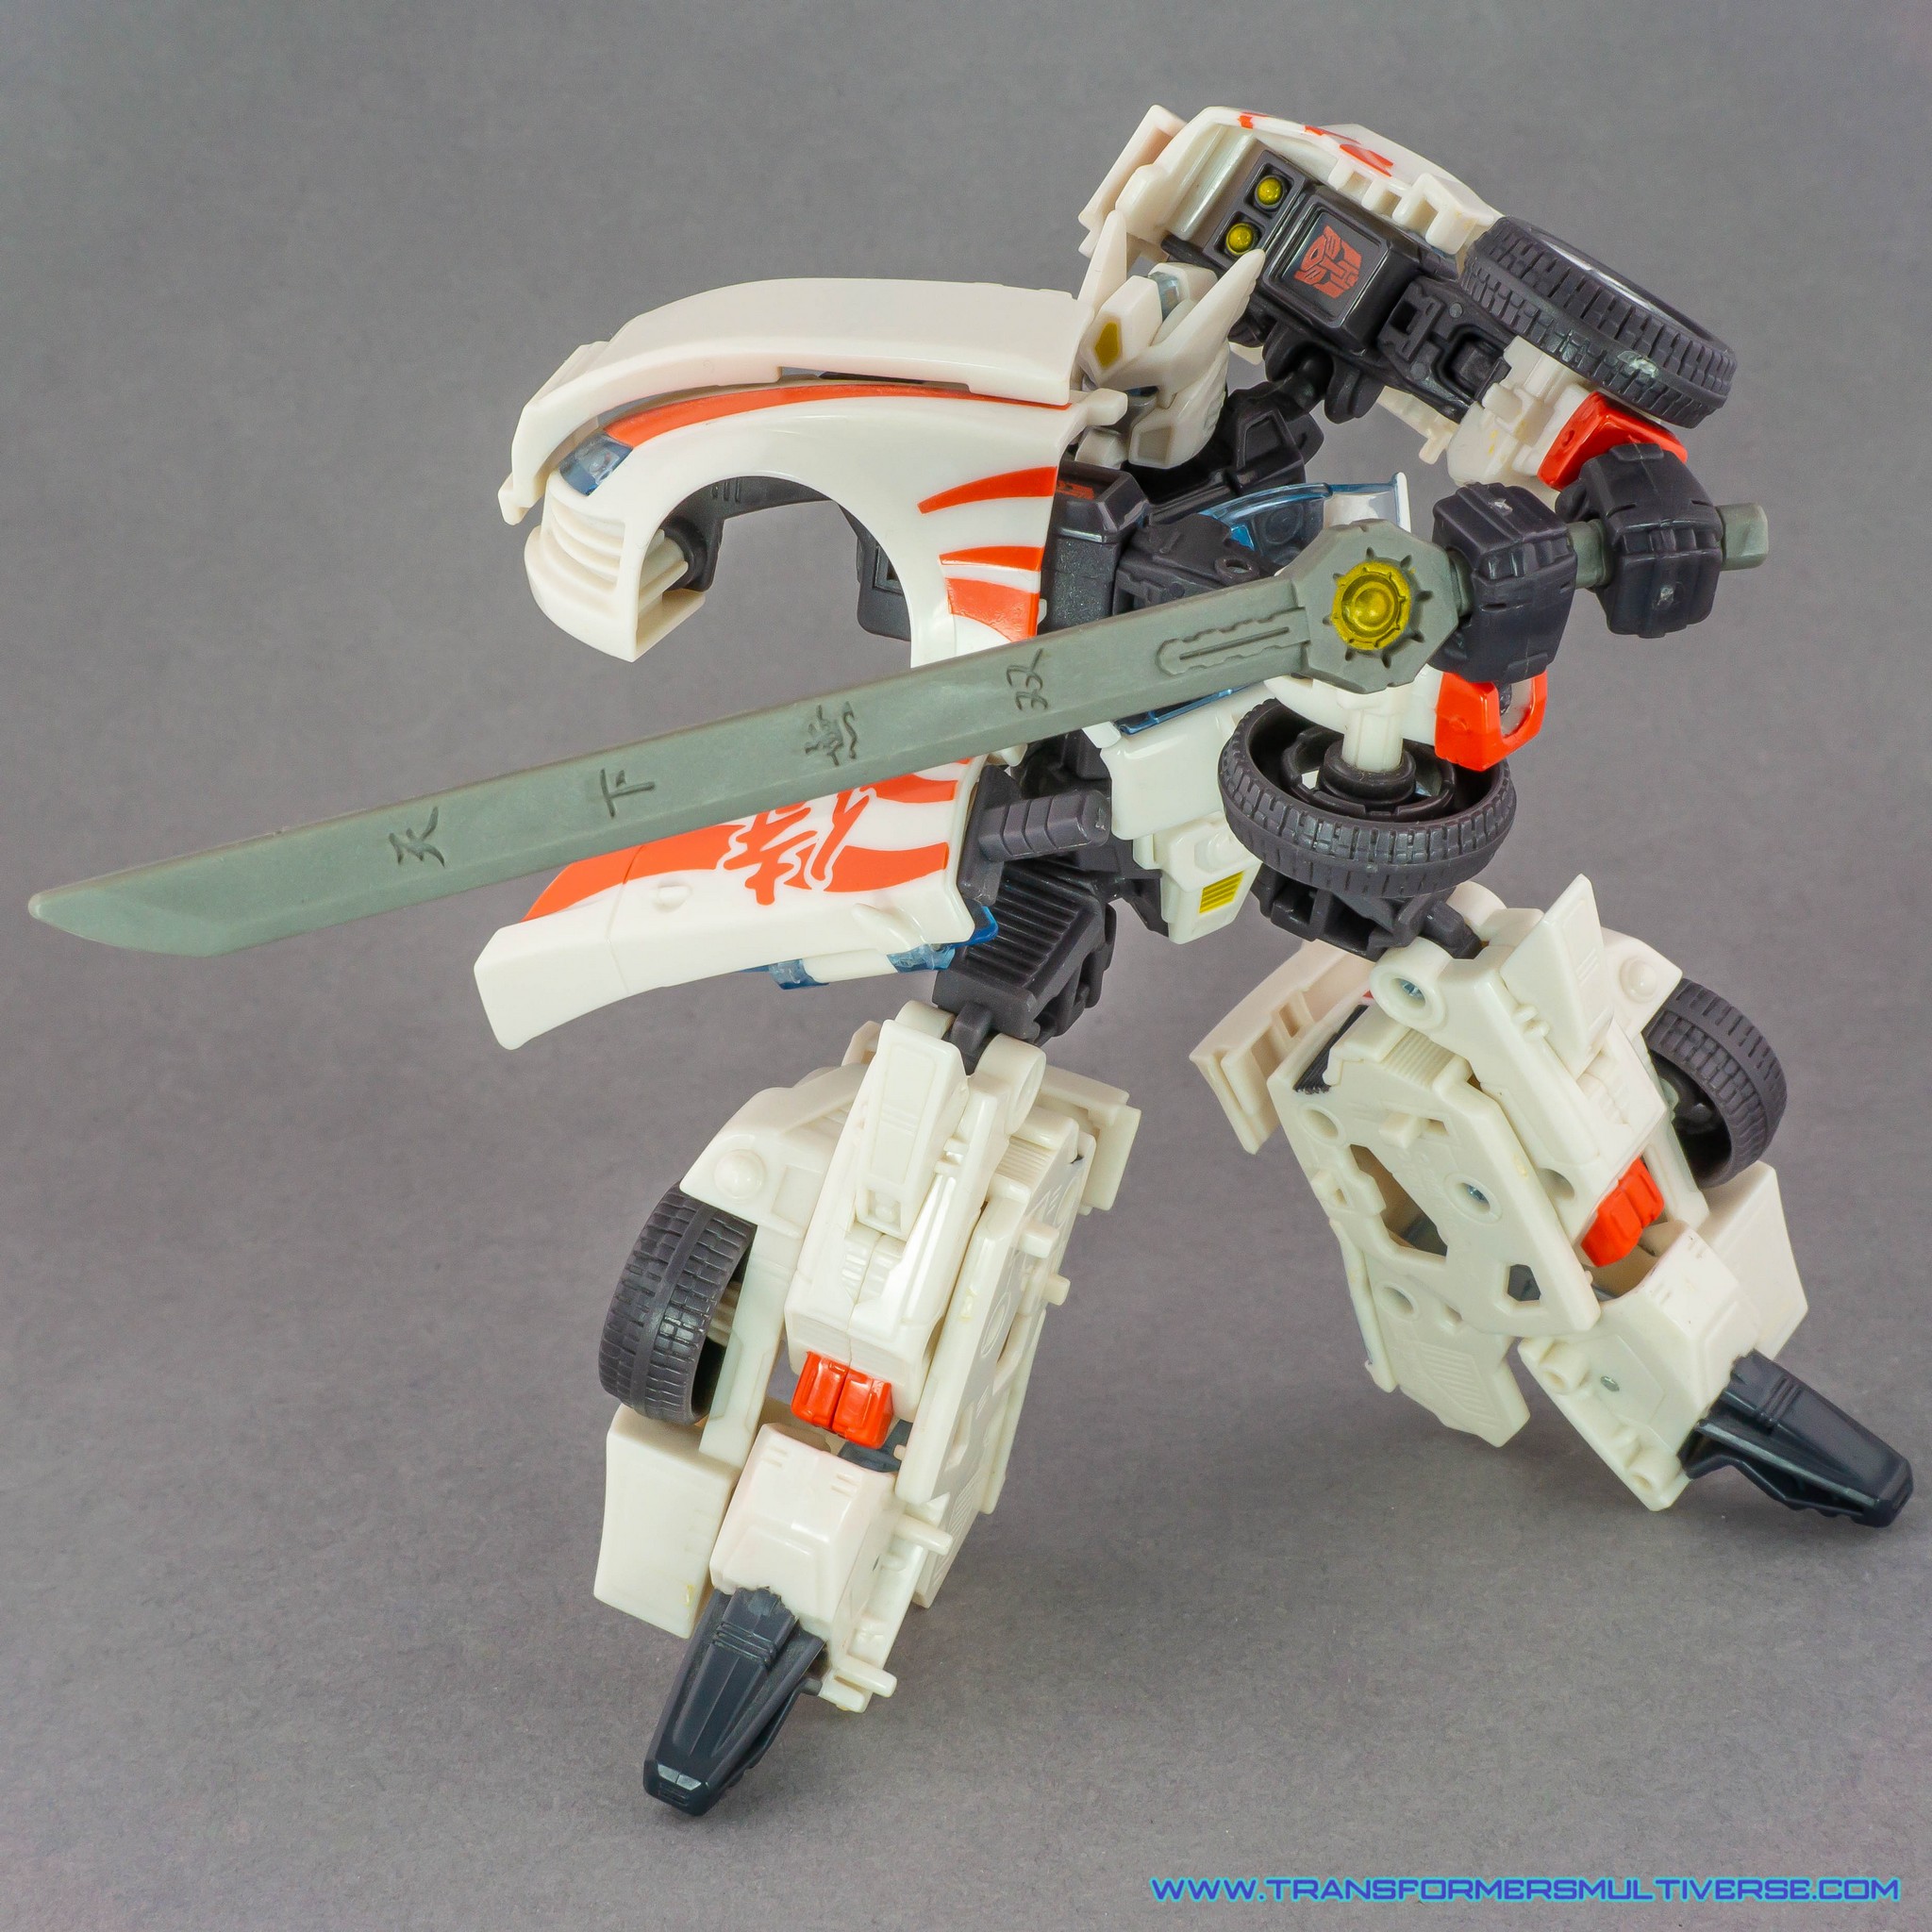 Transformers Generations Drift posed with Great Sword 2